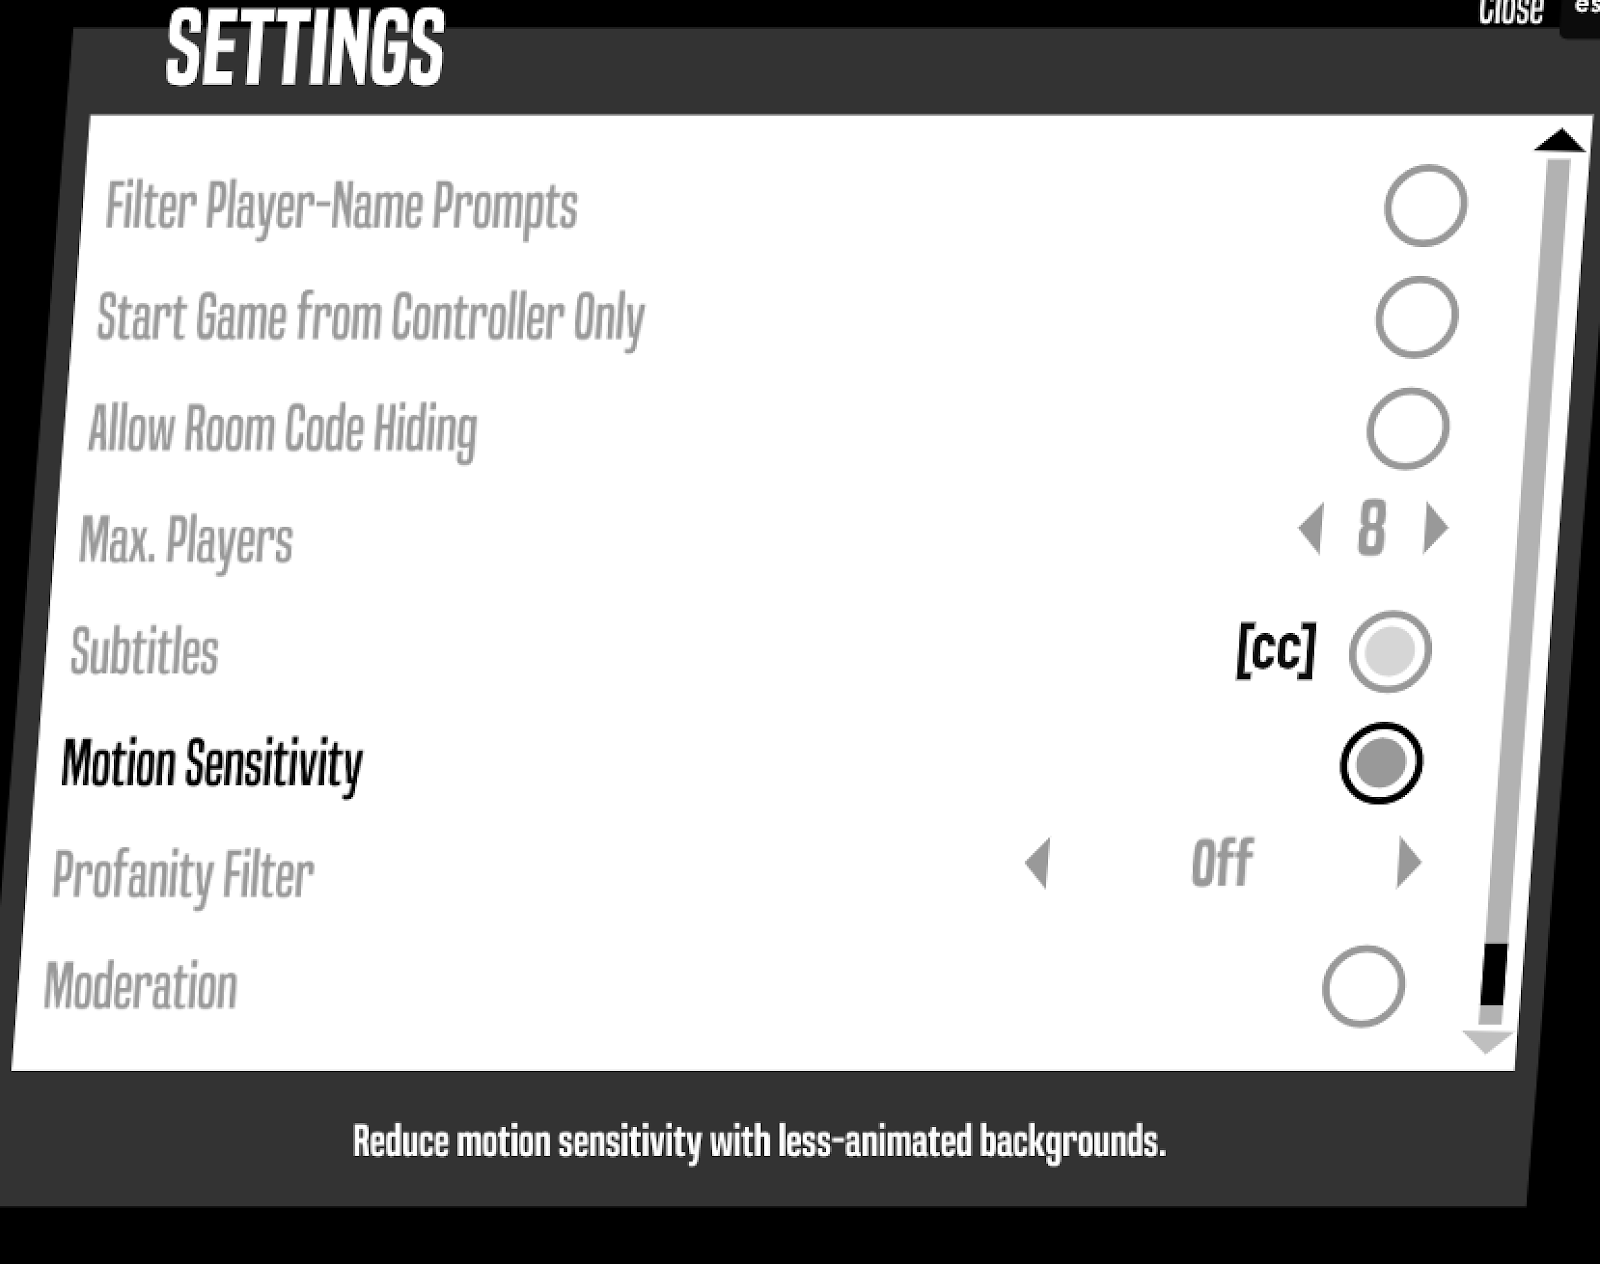 Champ'd Up settings menu. Motion sensitivity is 6th option, in black to indicate it is selected.